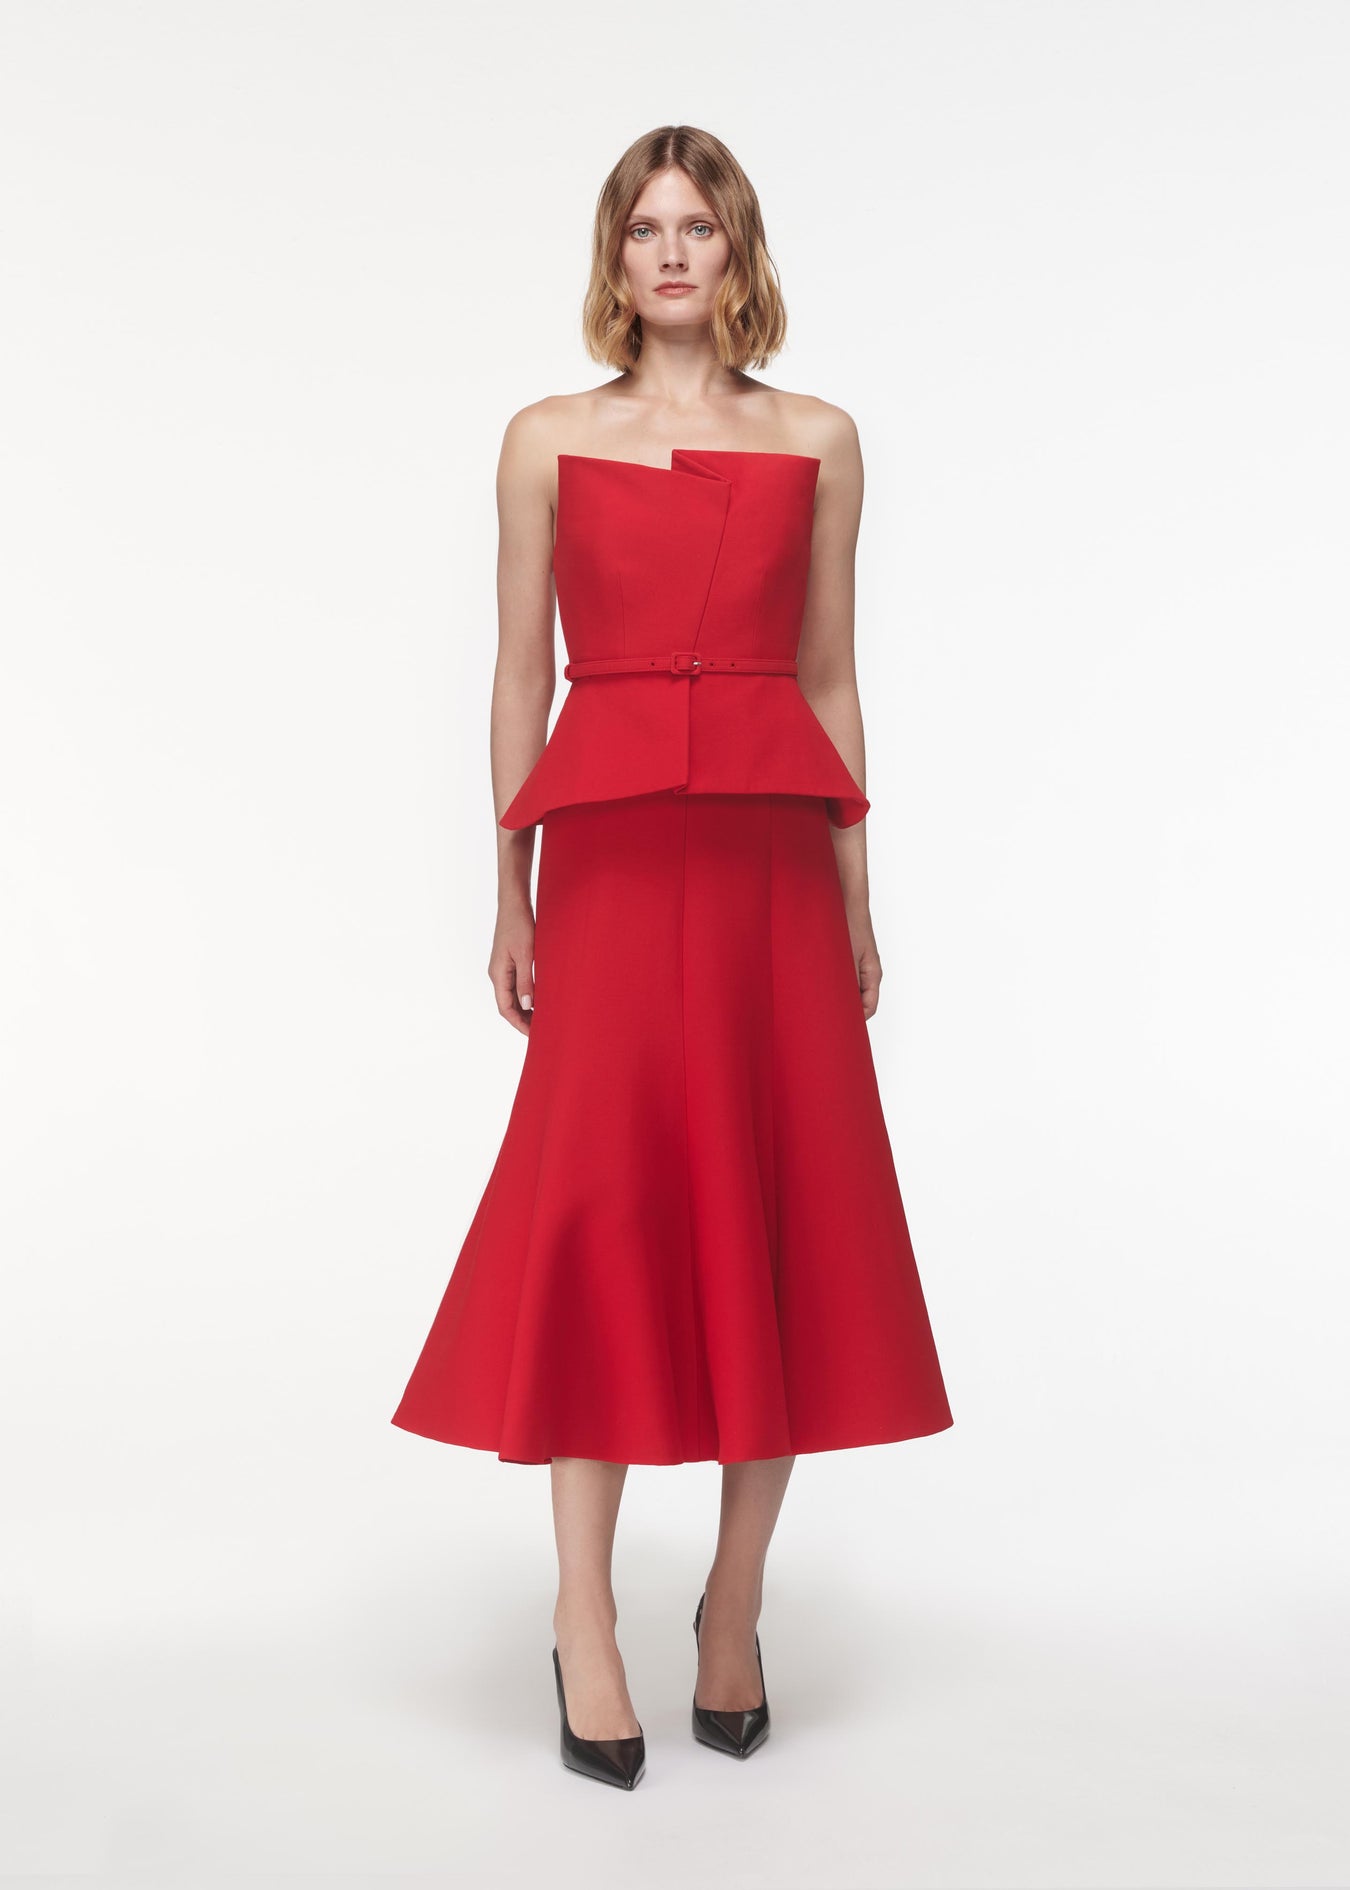 A photograph of a woman wearing a Strapless Wool Silk Peplum Midi Dress in Red